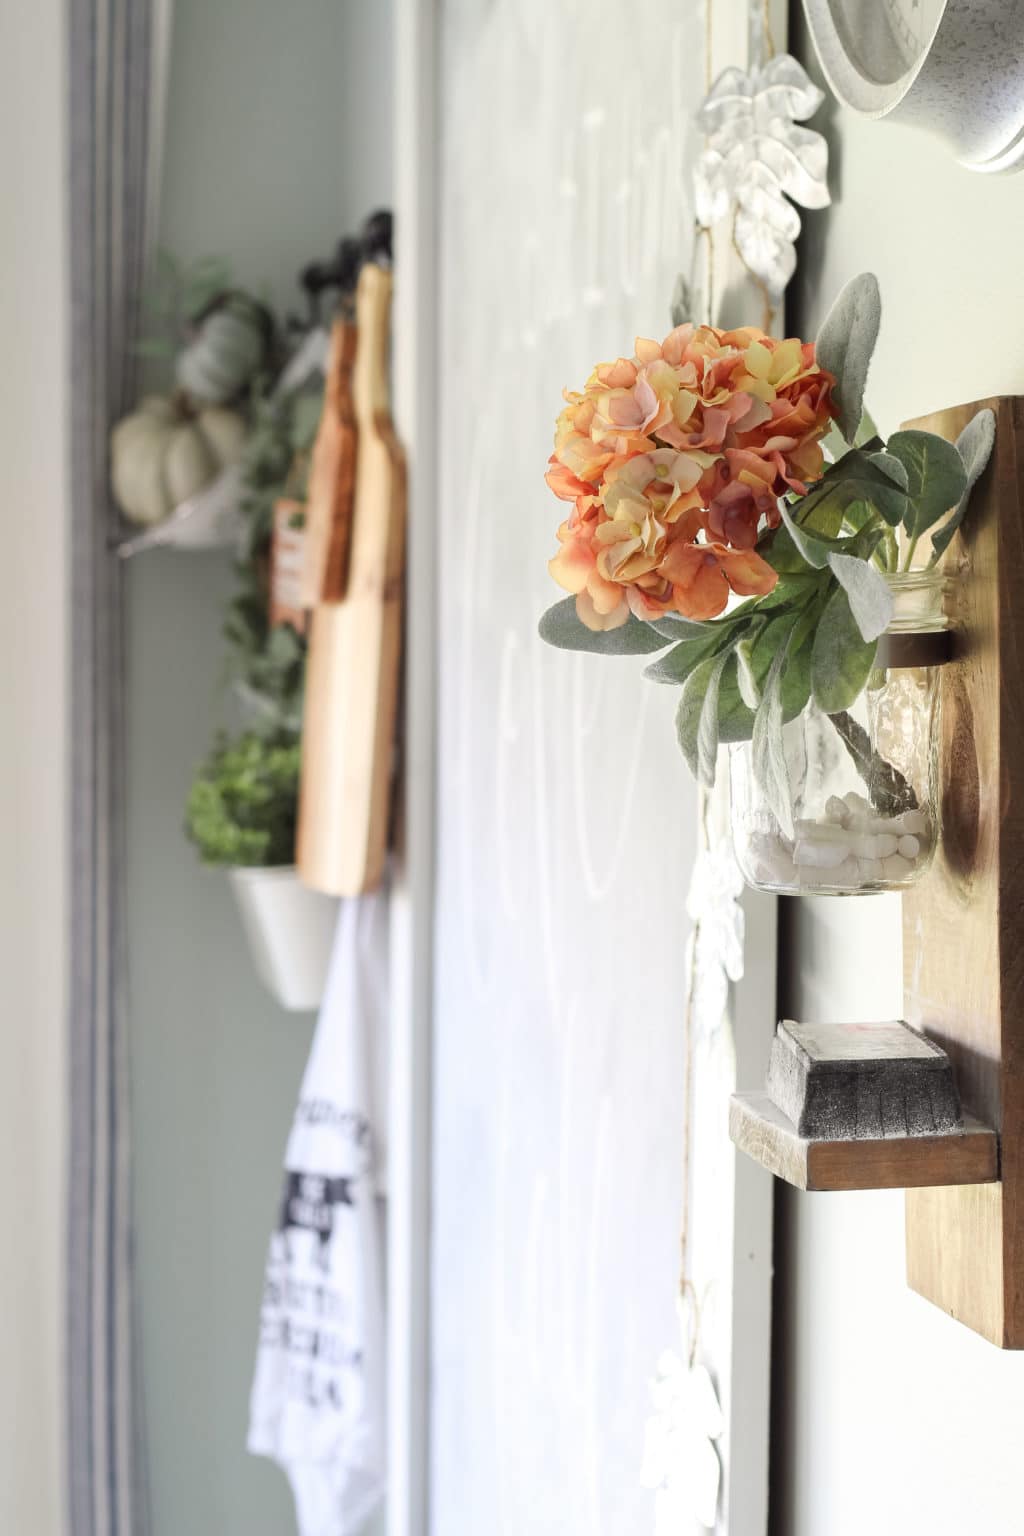 Chalk holder next to a chalkboard with a coral hydrangea for fall! Fall Home Tour | Fall Home Decor Ideas